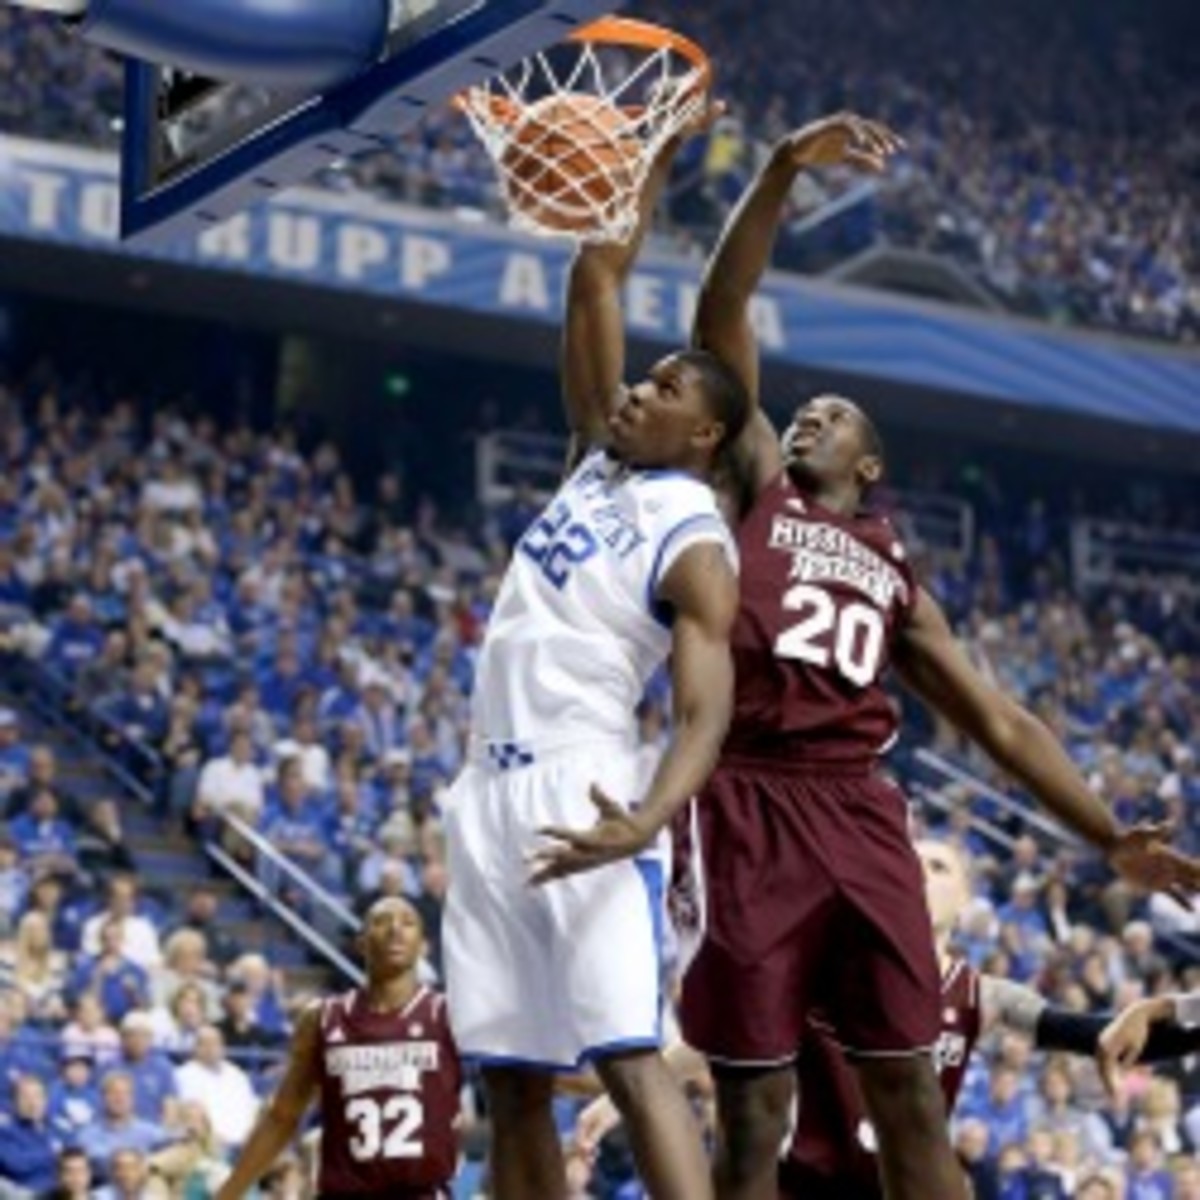 Kentucky forward Alex Poythress is returning for his sophomore season. (Andy Lyons/Getty Images)